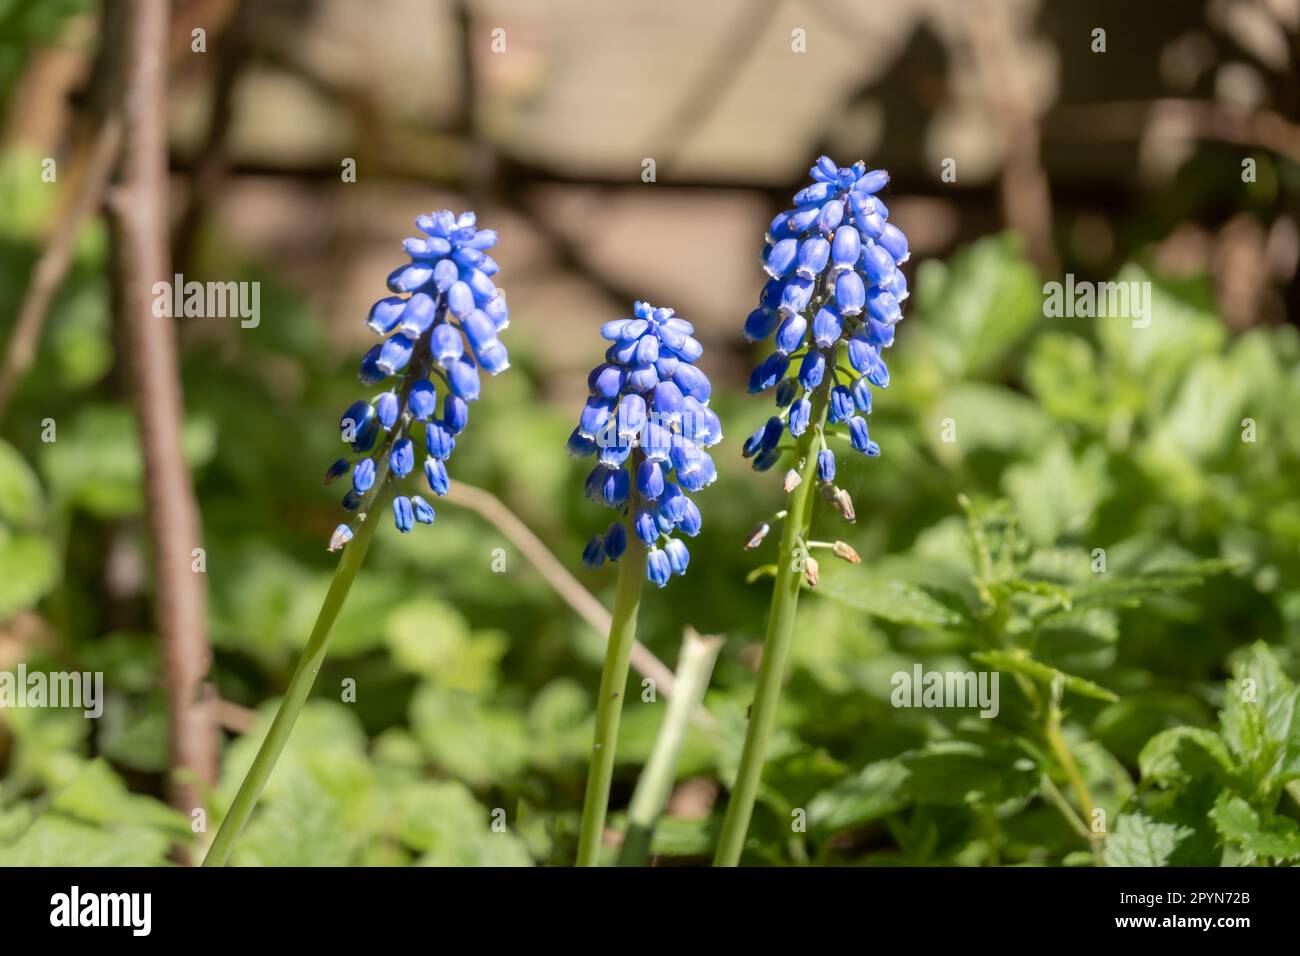 Grape hyacinth, muscari botryoides, three blue flowers and stems in garden in spring, Netherlands Stock Photo